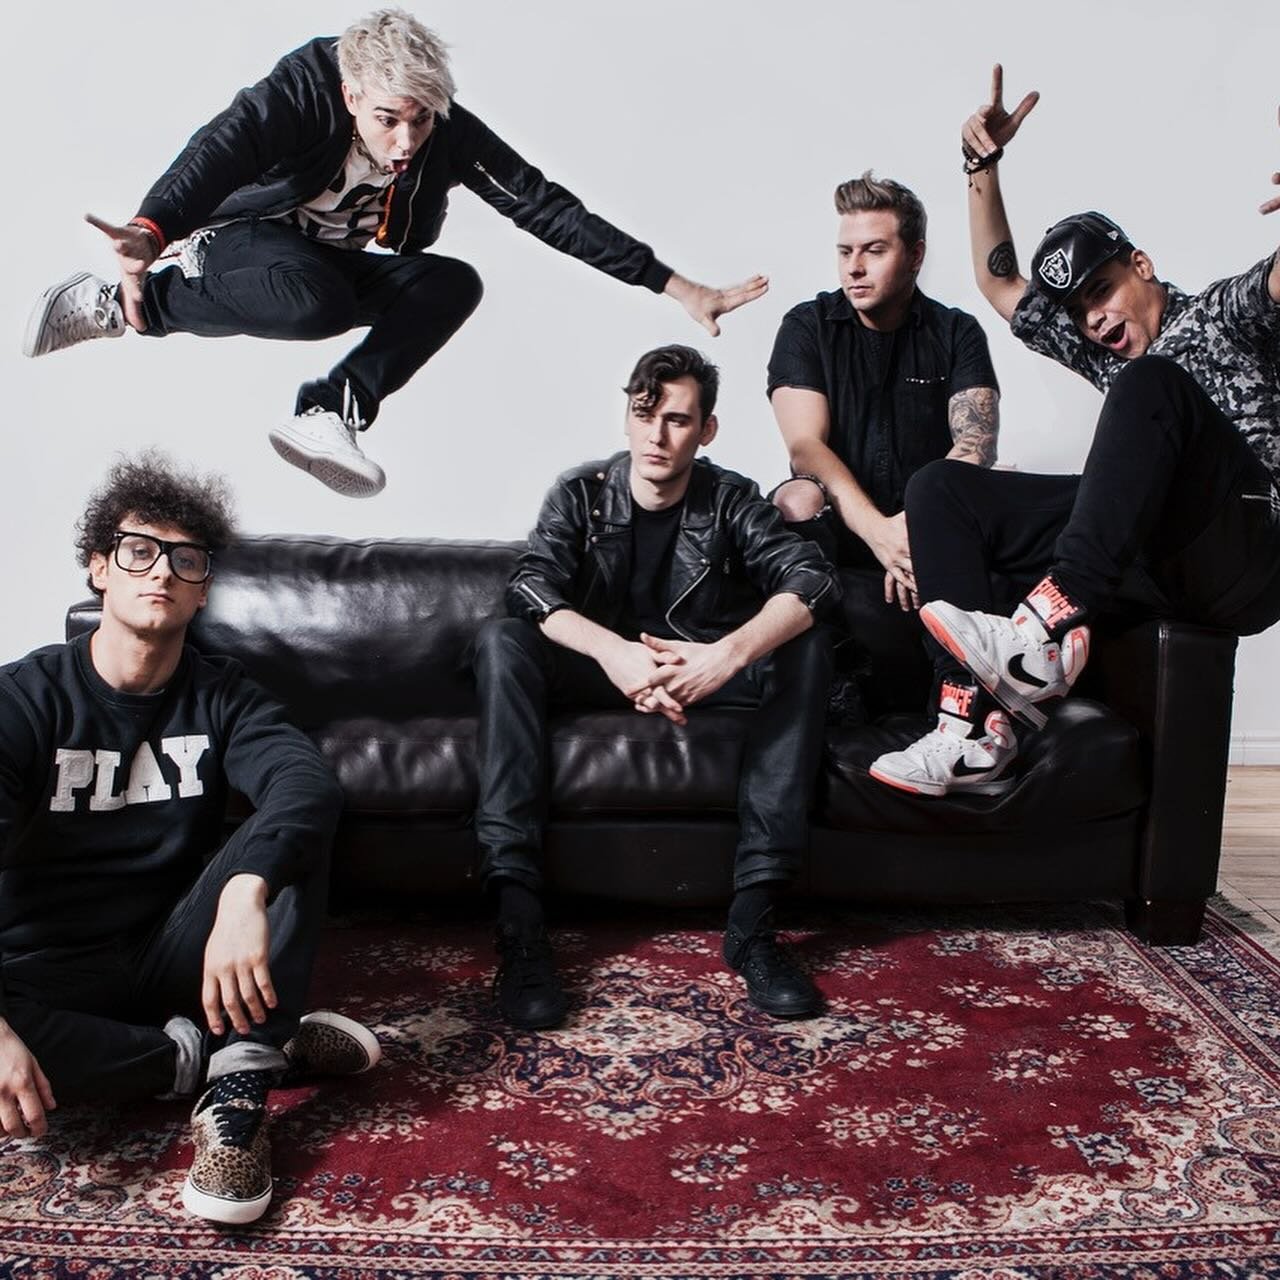 JUST IN: @downwithwebster are BACK! Catch the iconic rap-rockers live on July 24th! Tickets on sale Friday at 10am.